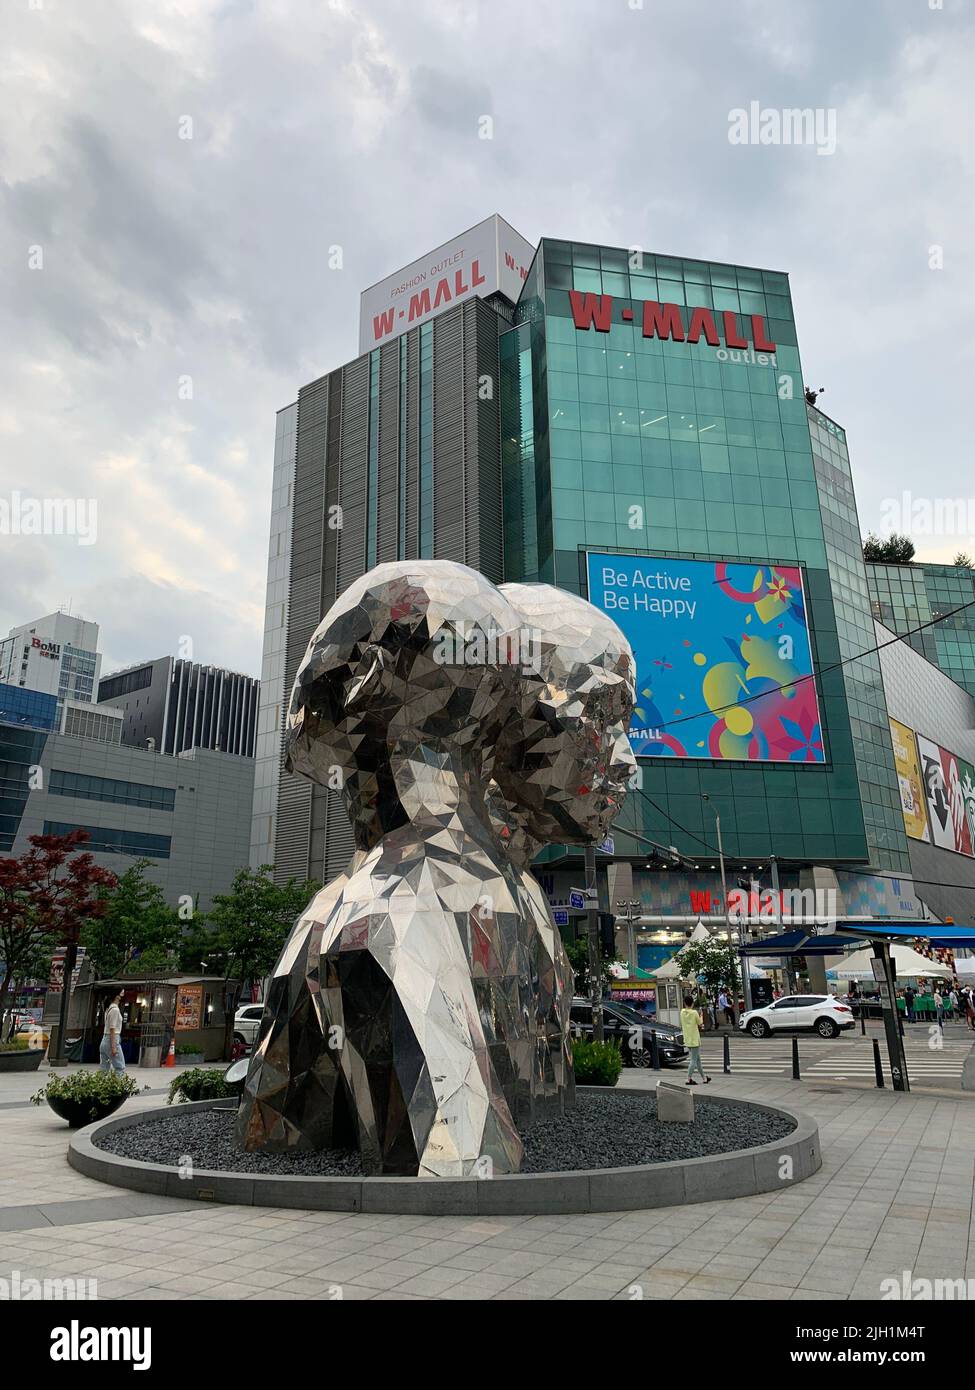 A silver street art statue of two people with a mall in the background in Seul, South Korea Stock Photo